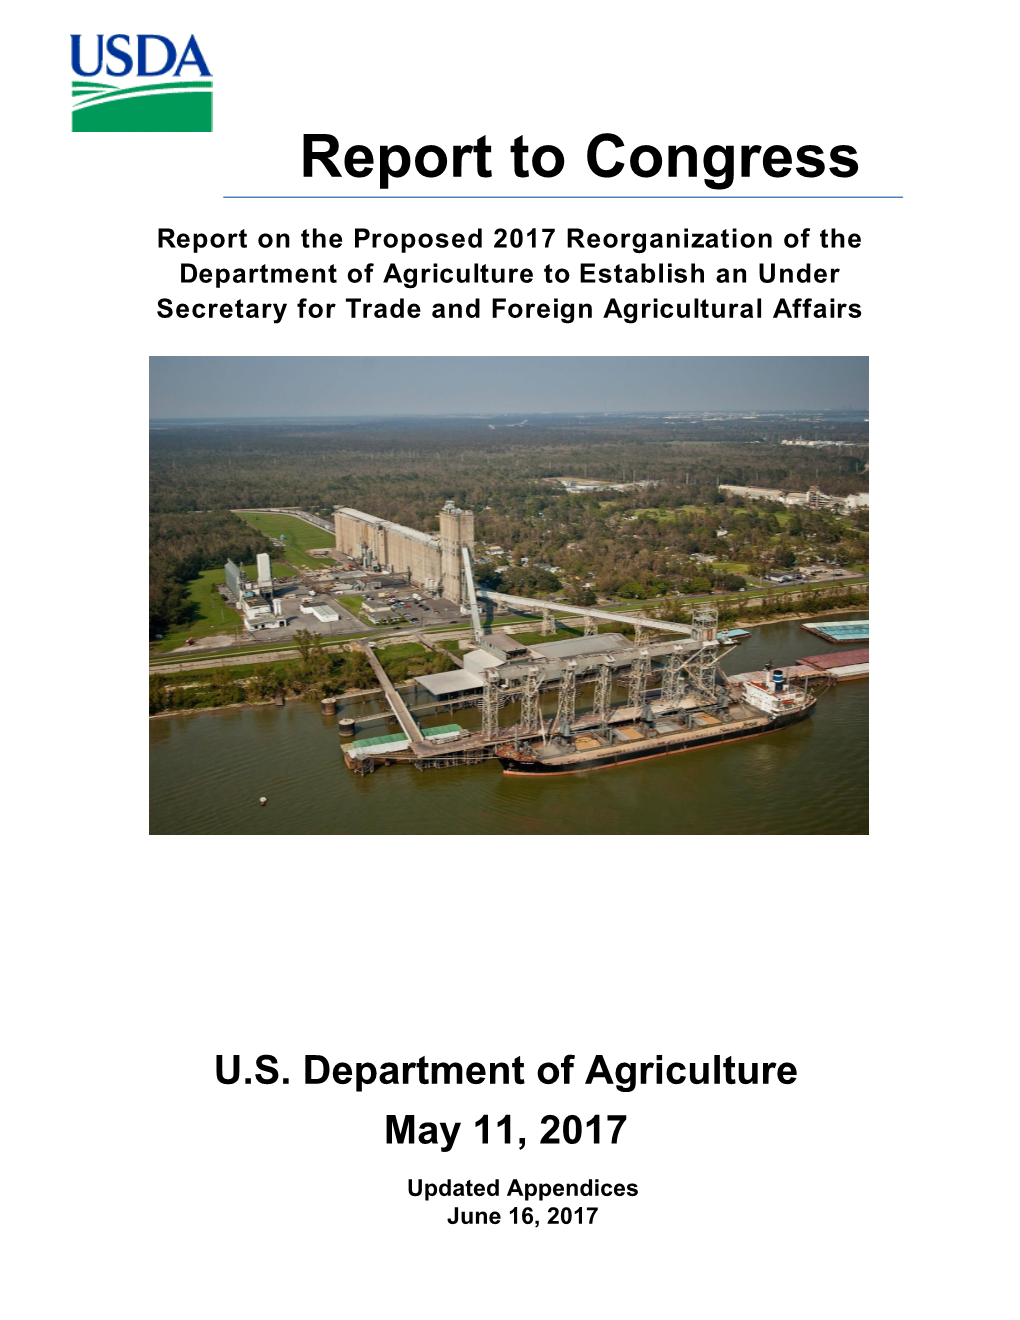 U.S. Department of Agriculture May 11, 2017 Report to Congress